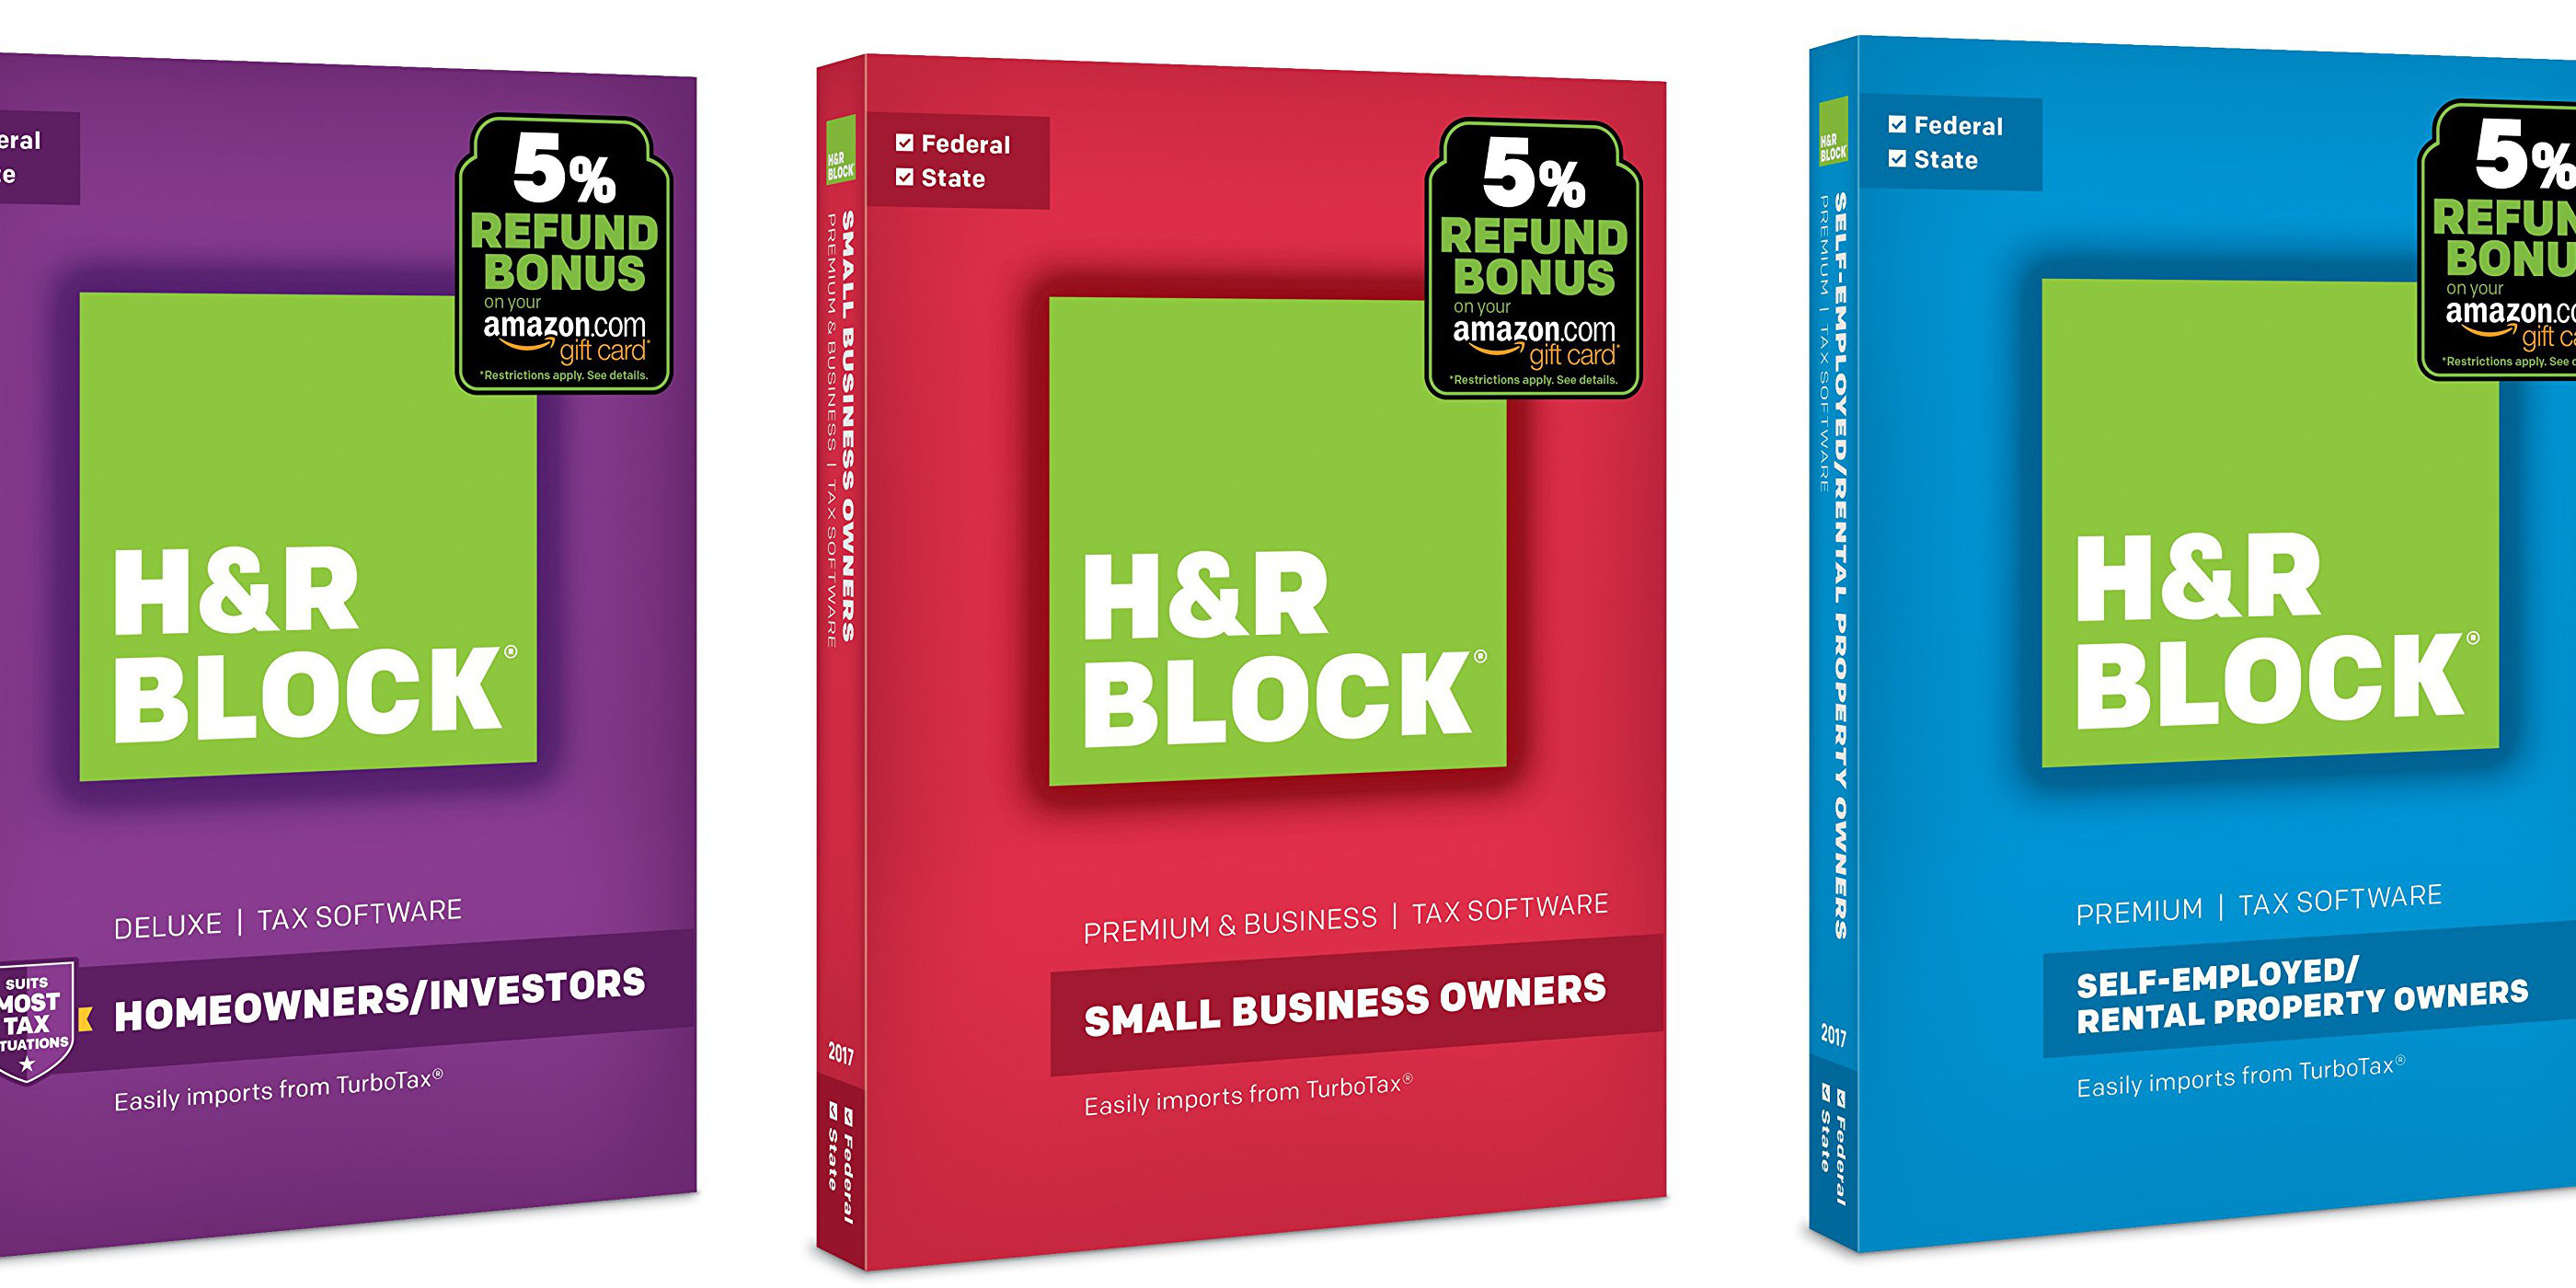 Amazon offers 50 off H&R Block Tax Software for Mac/PC Deluxe + State